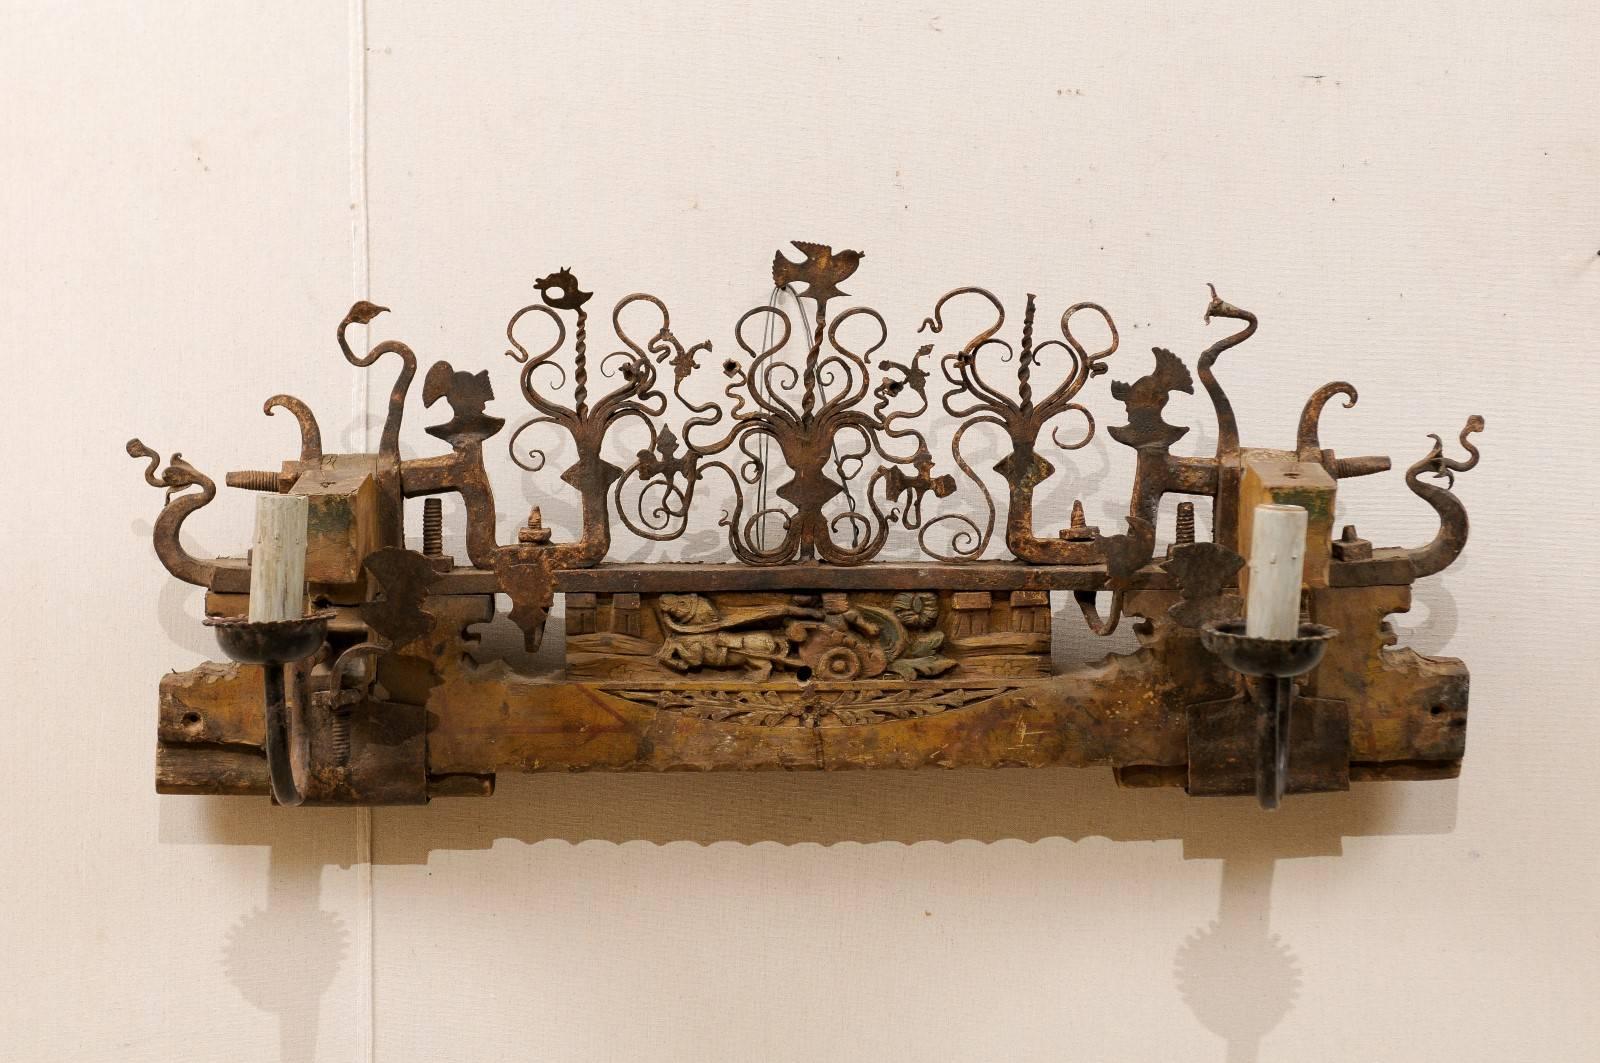 A single Sicilian two-light sconce of cut metal and wood. This unique Sicilian sconce, from the mid-20th century, is composed of a wood base with cut metal design, which was the original decorative piece from and ox cart. The sconce is adorn with